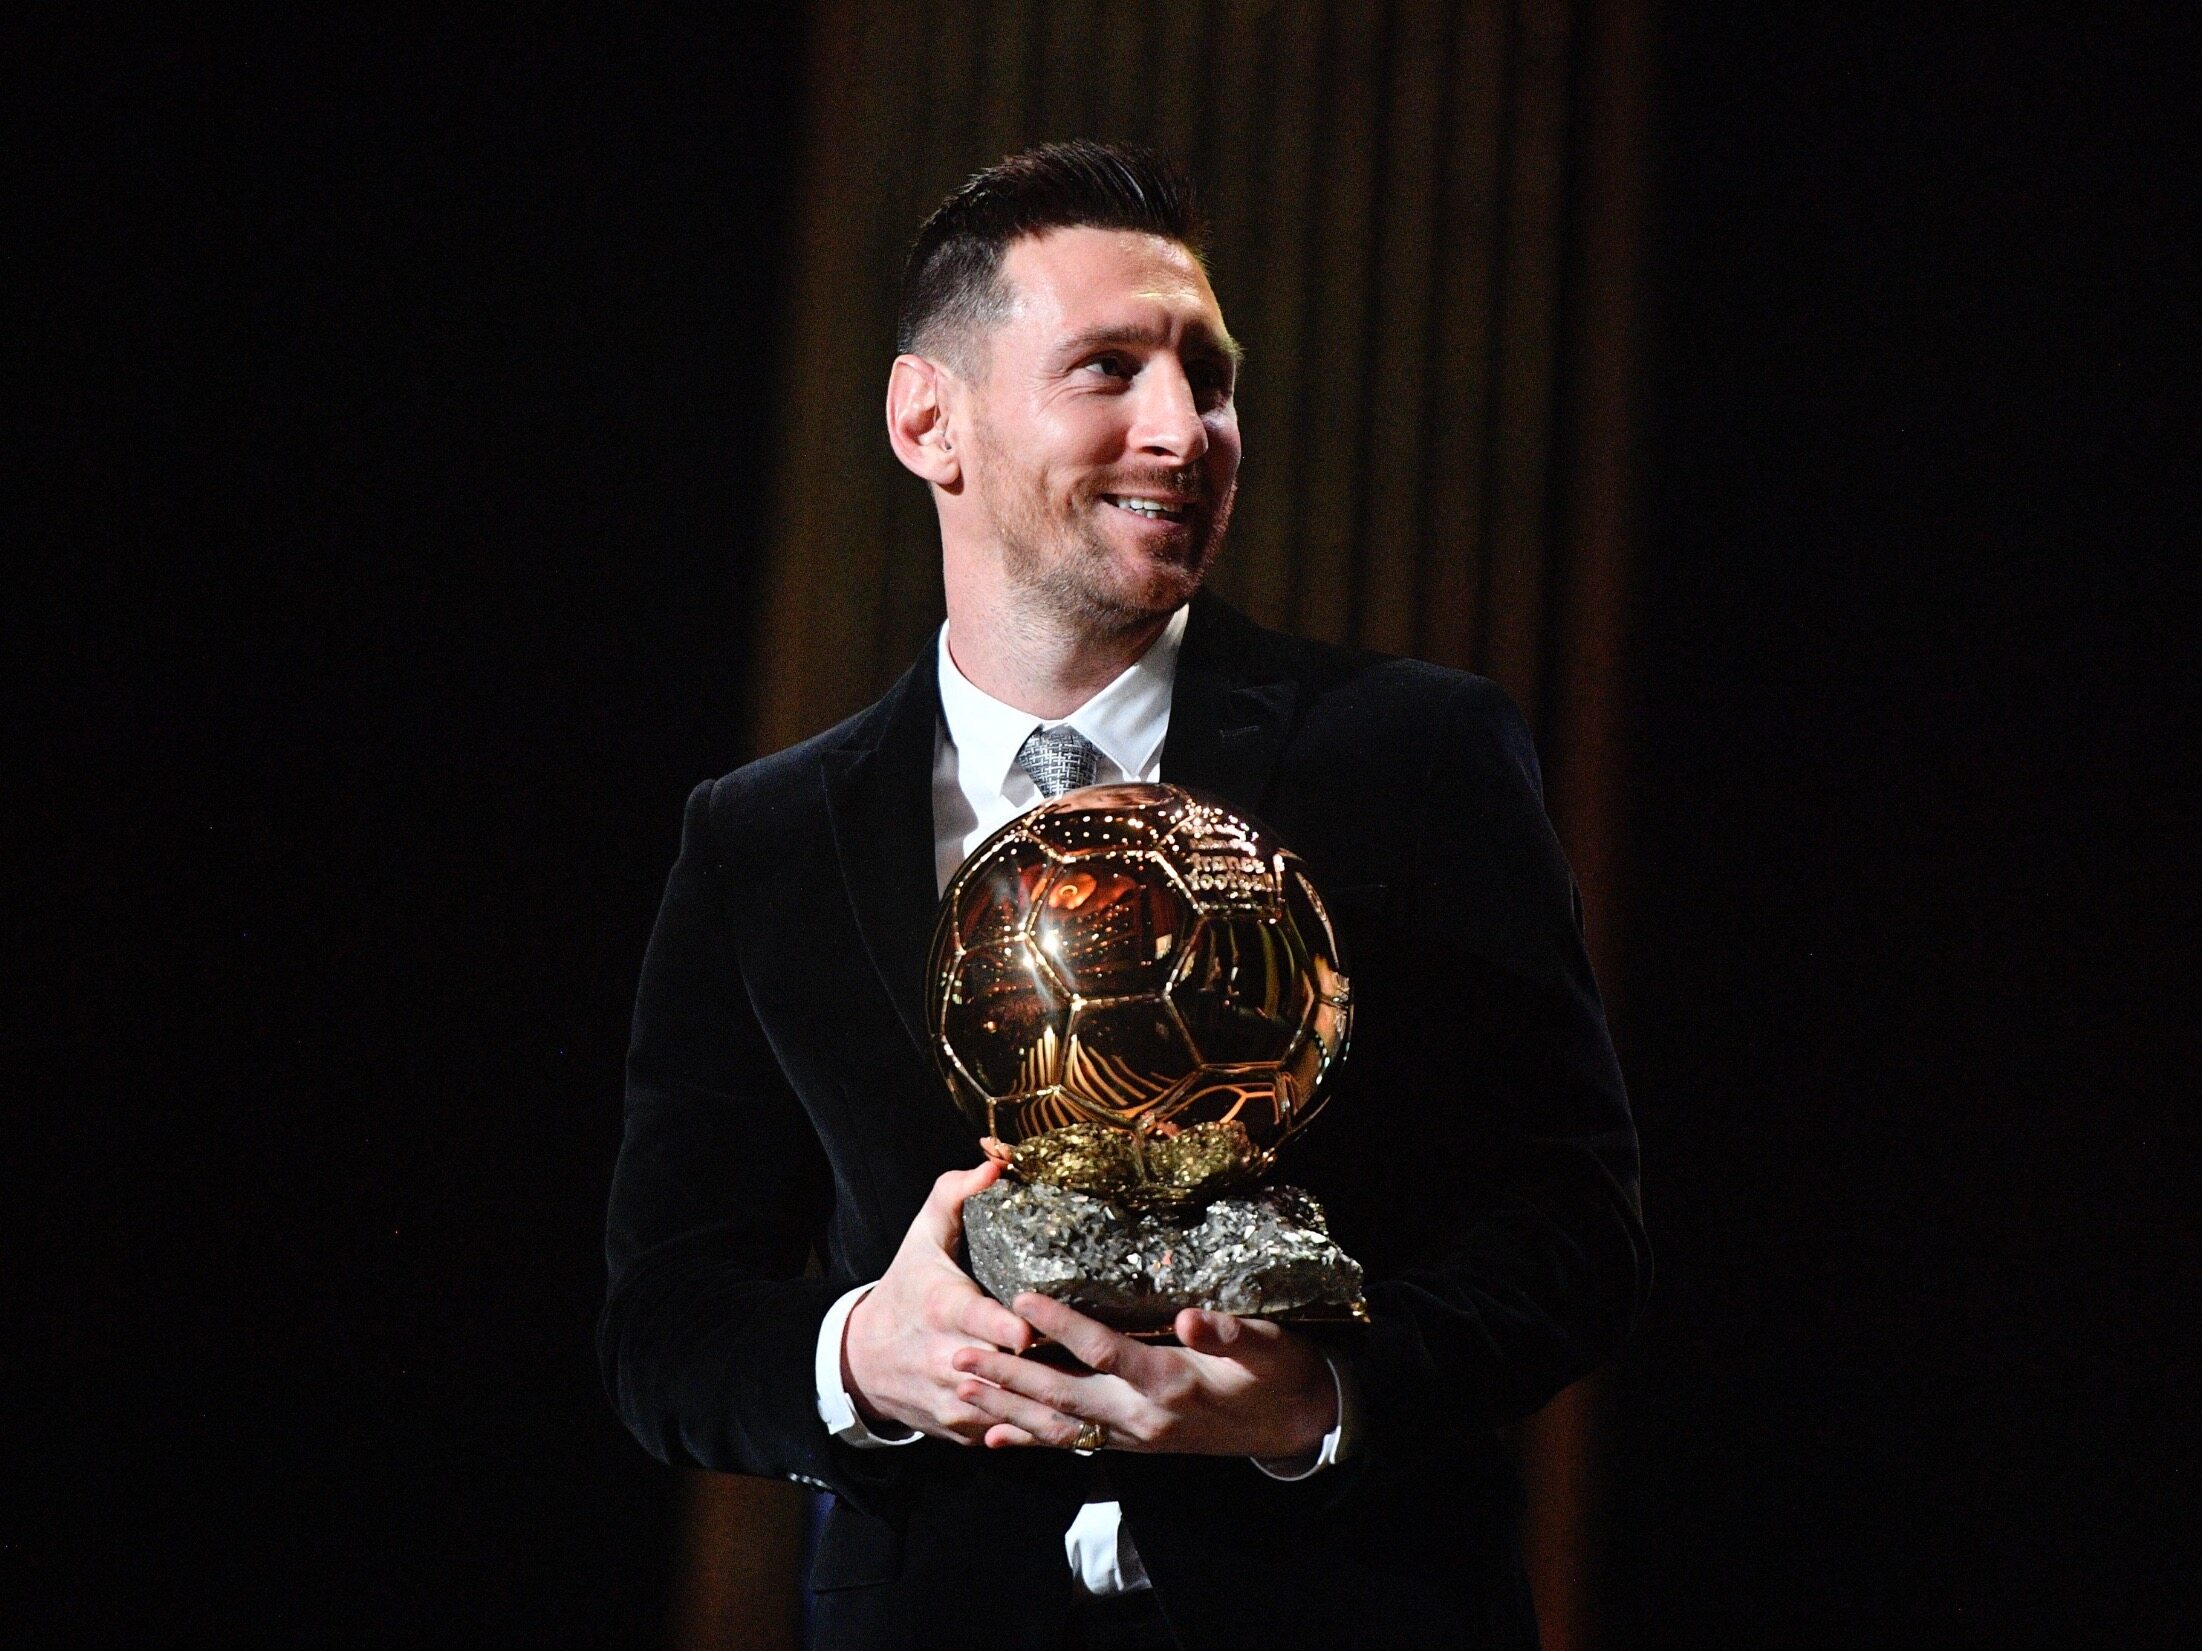 Lionel Messi at the top of the football world.  There is only one King of the Ballon d'Or